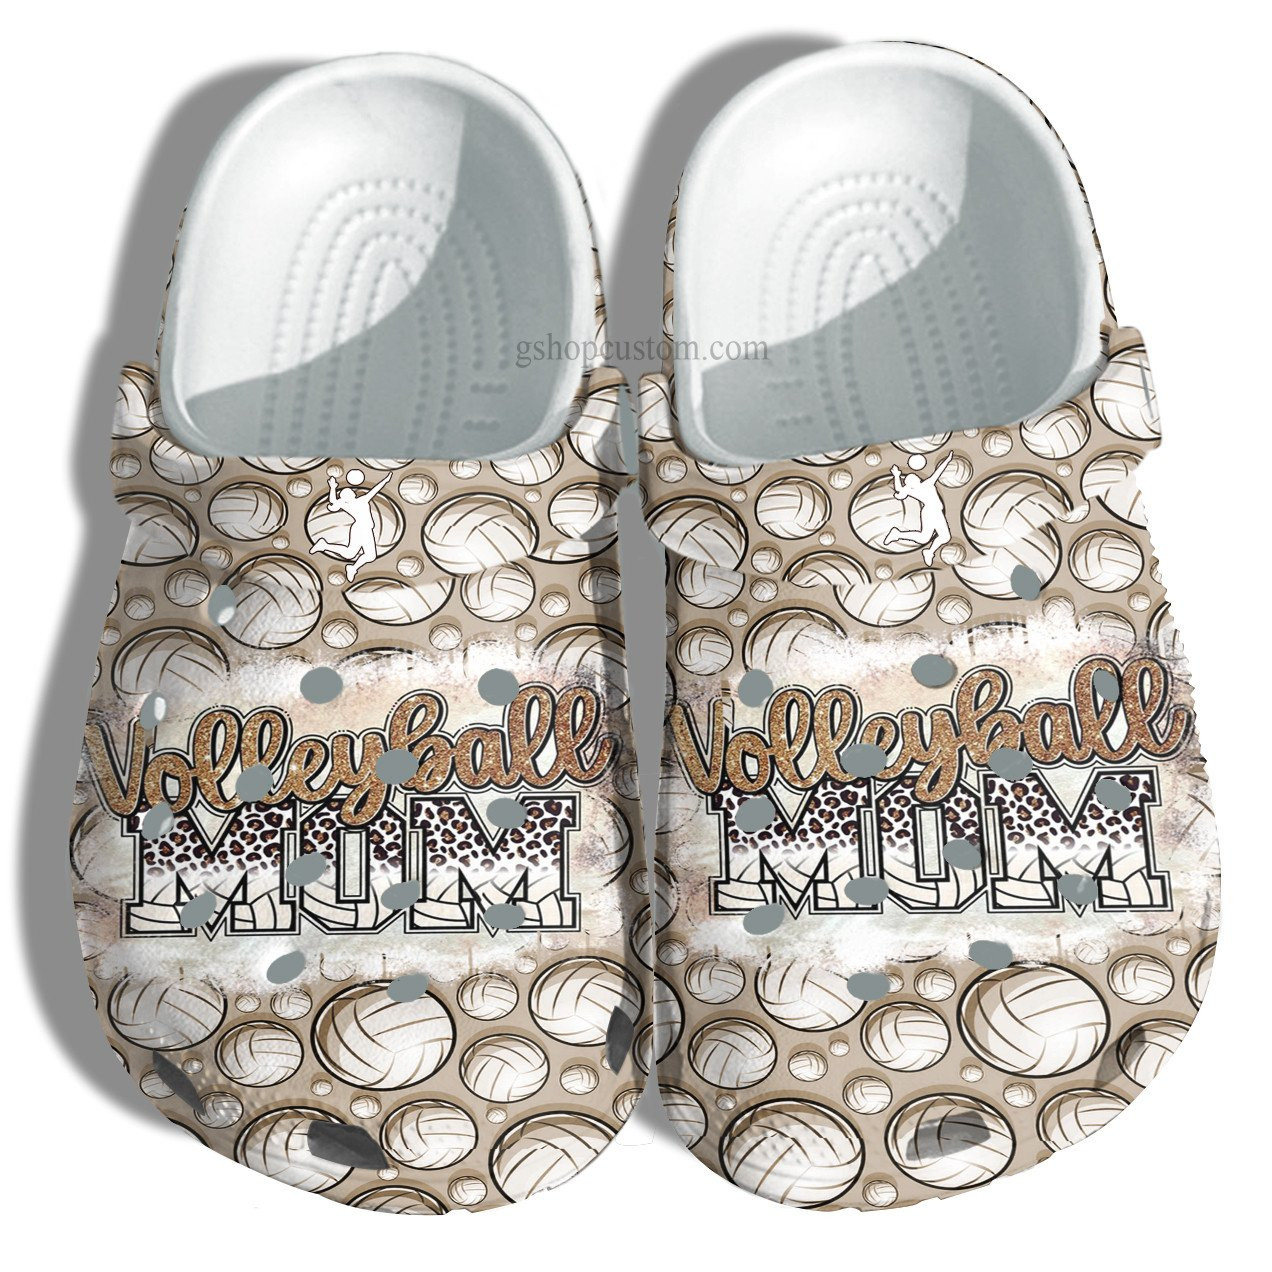 Volleyball Mom Leopard Twinkle Croc Shoes Gift Mommy - Volleyball Pattern Crocs Shoes Gift Women Birthday